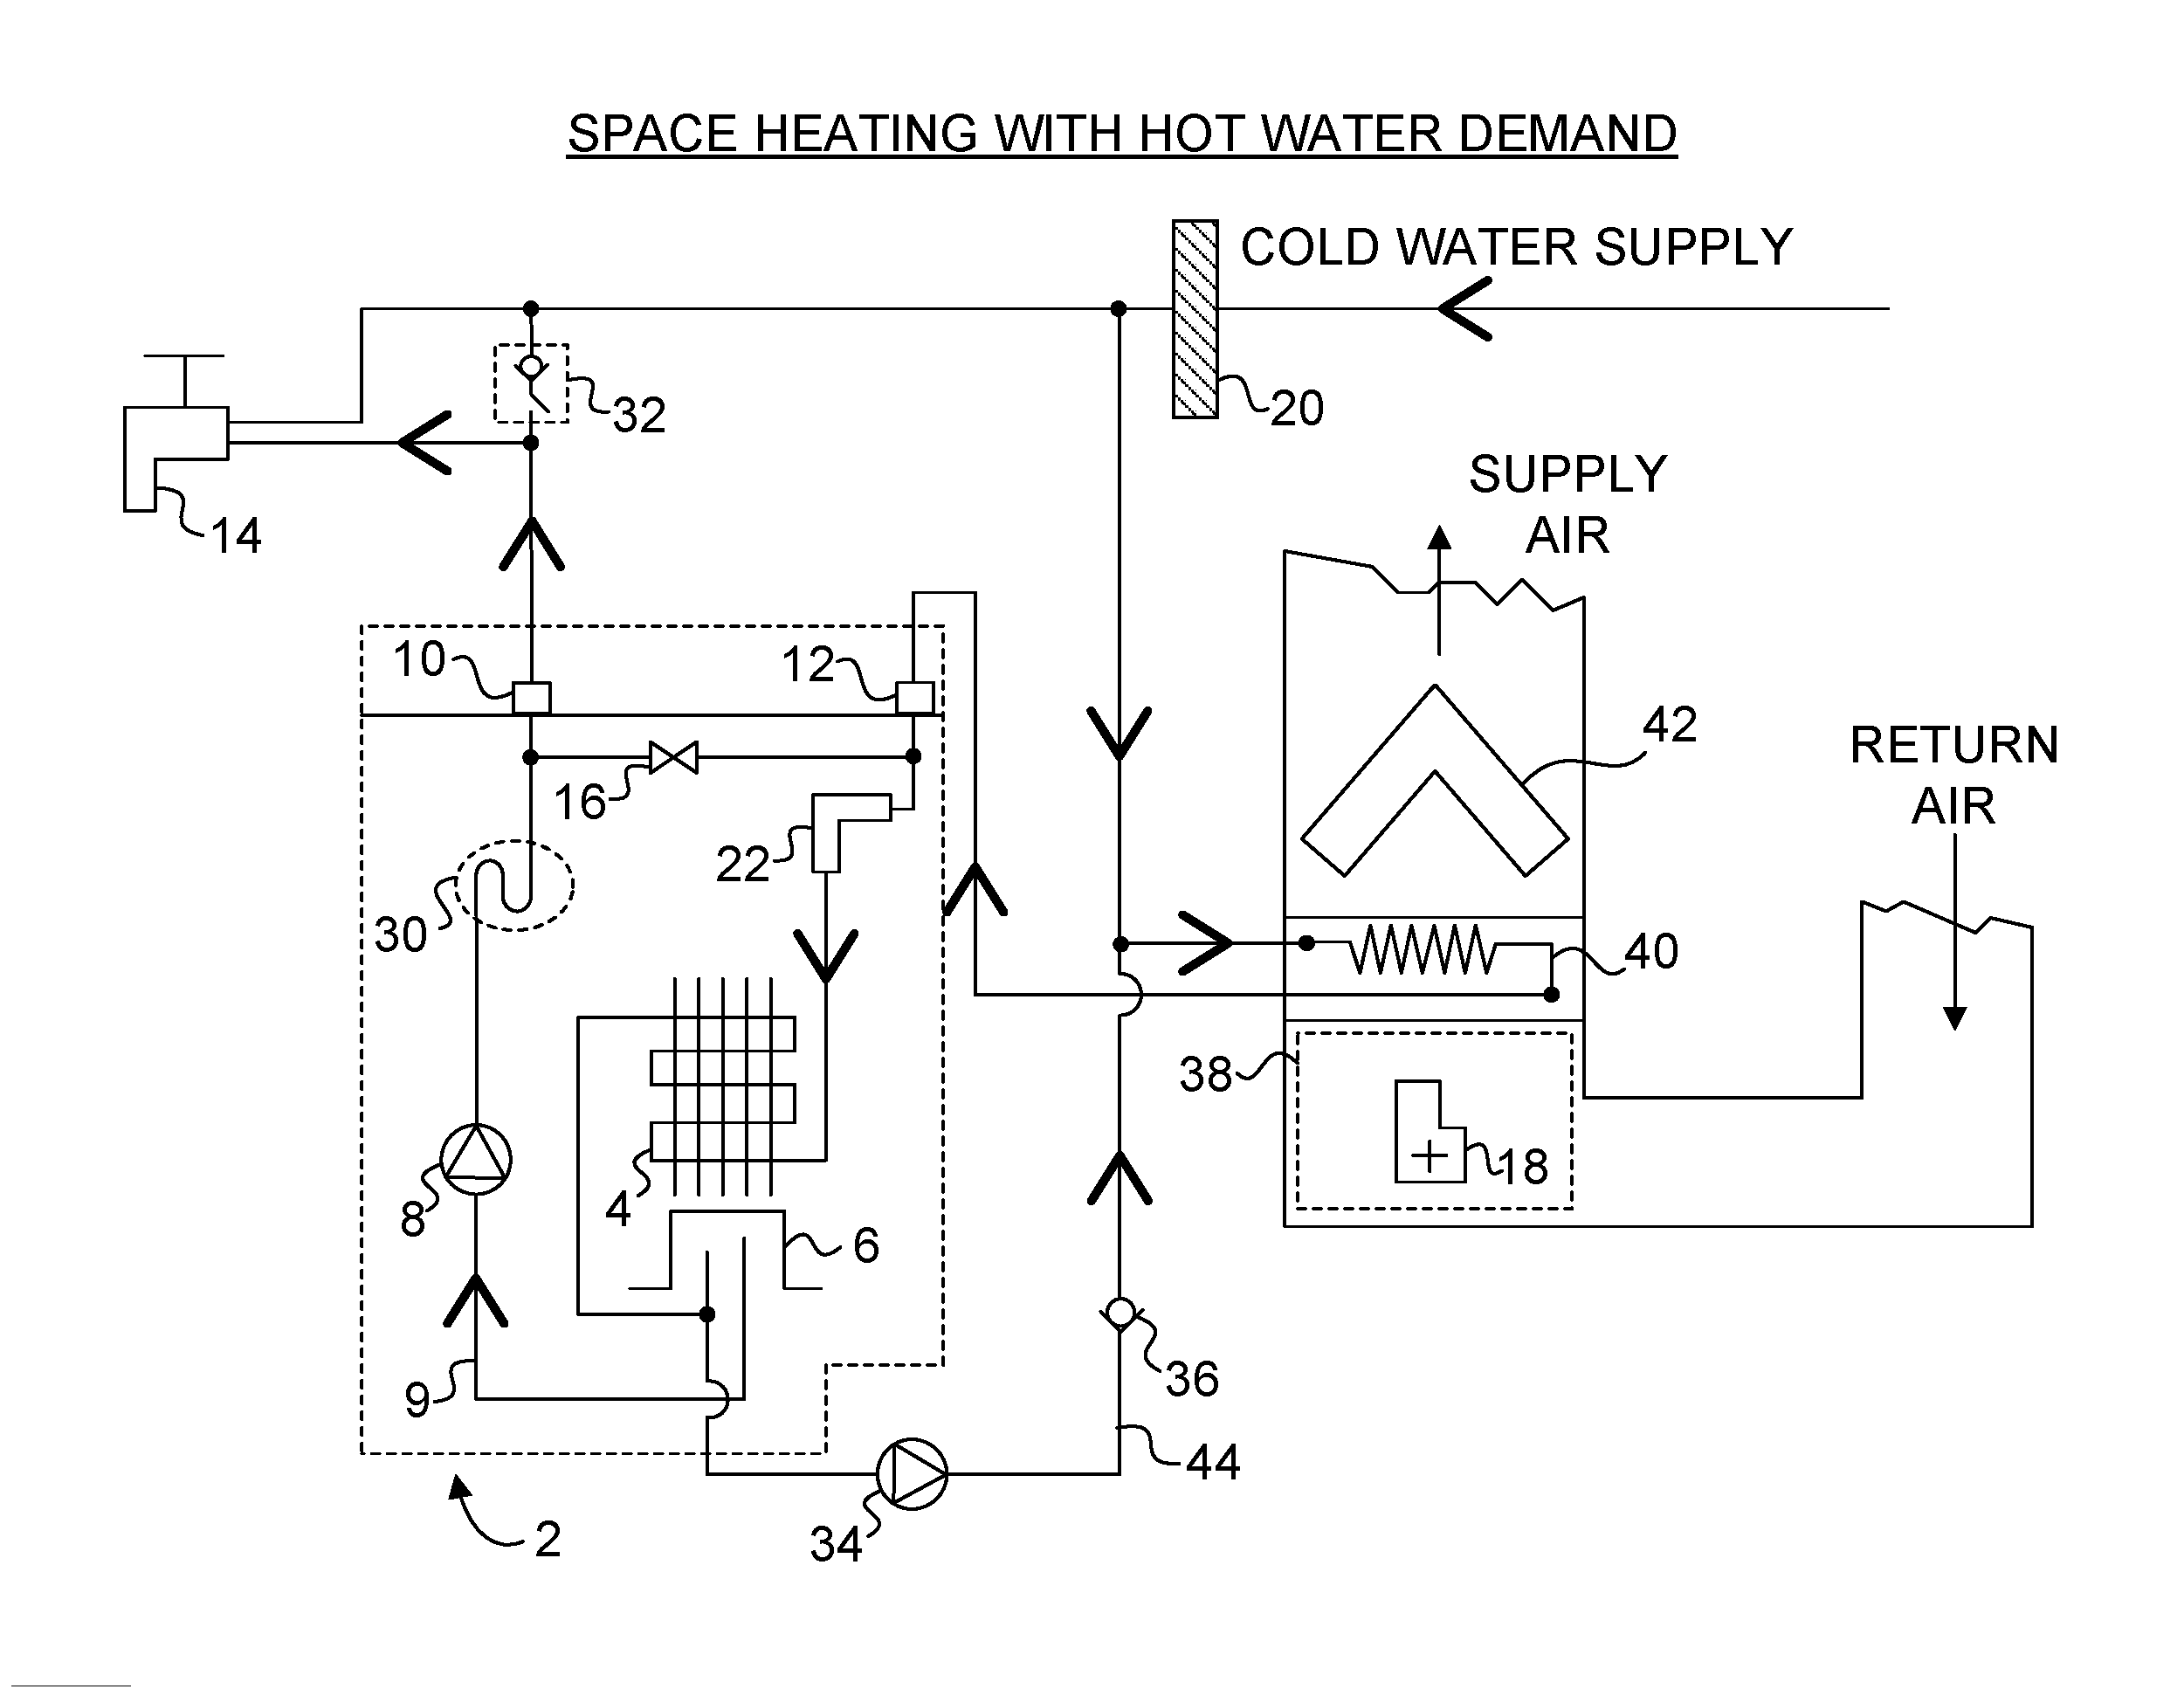 Combined space conditioning or heating and water heating system